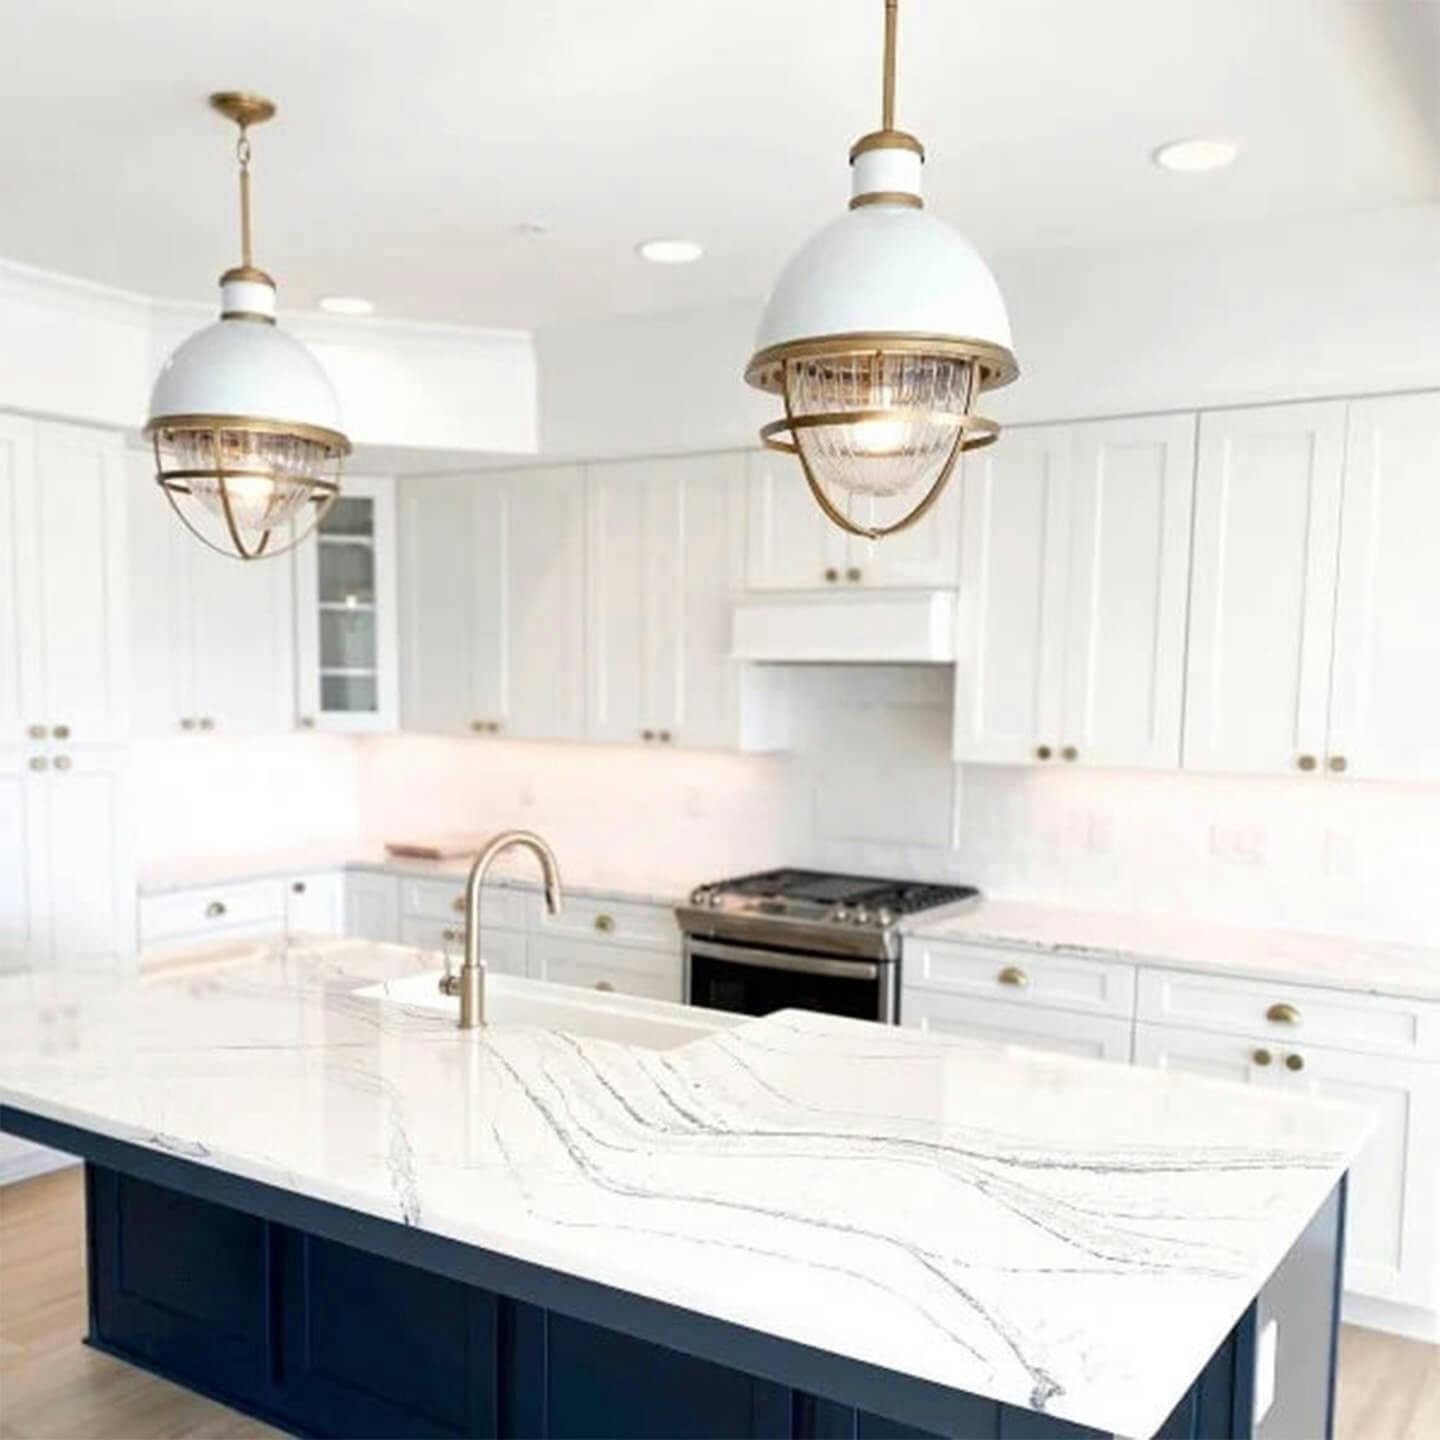 ginadragodesign instagram post of two Tollis pendants with white finish above a white marble kitchen island turned on during the day